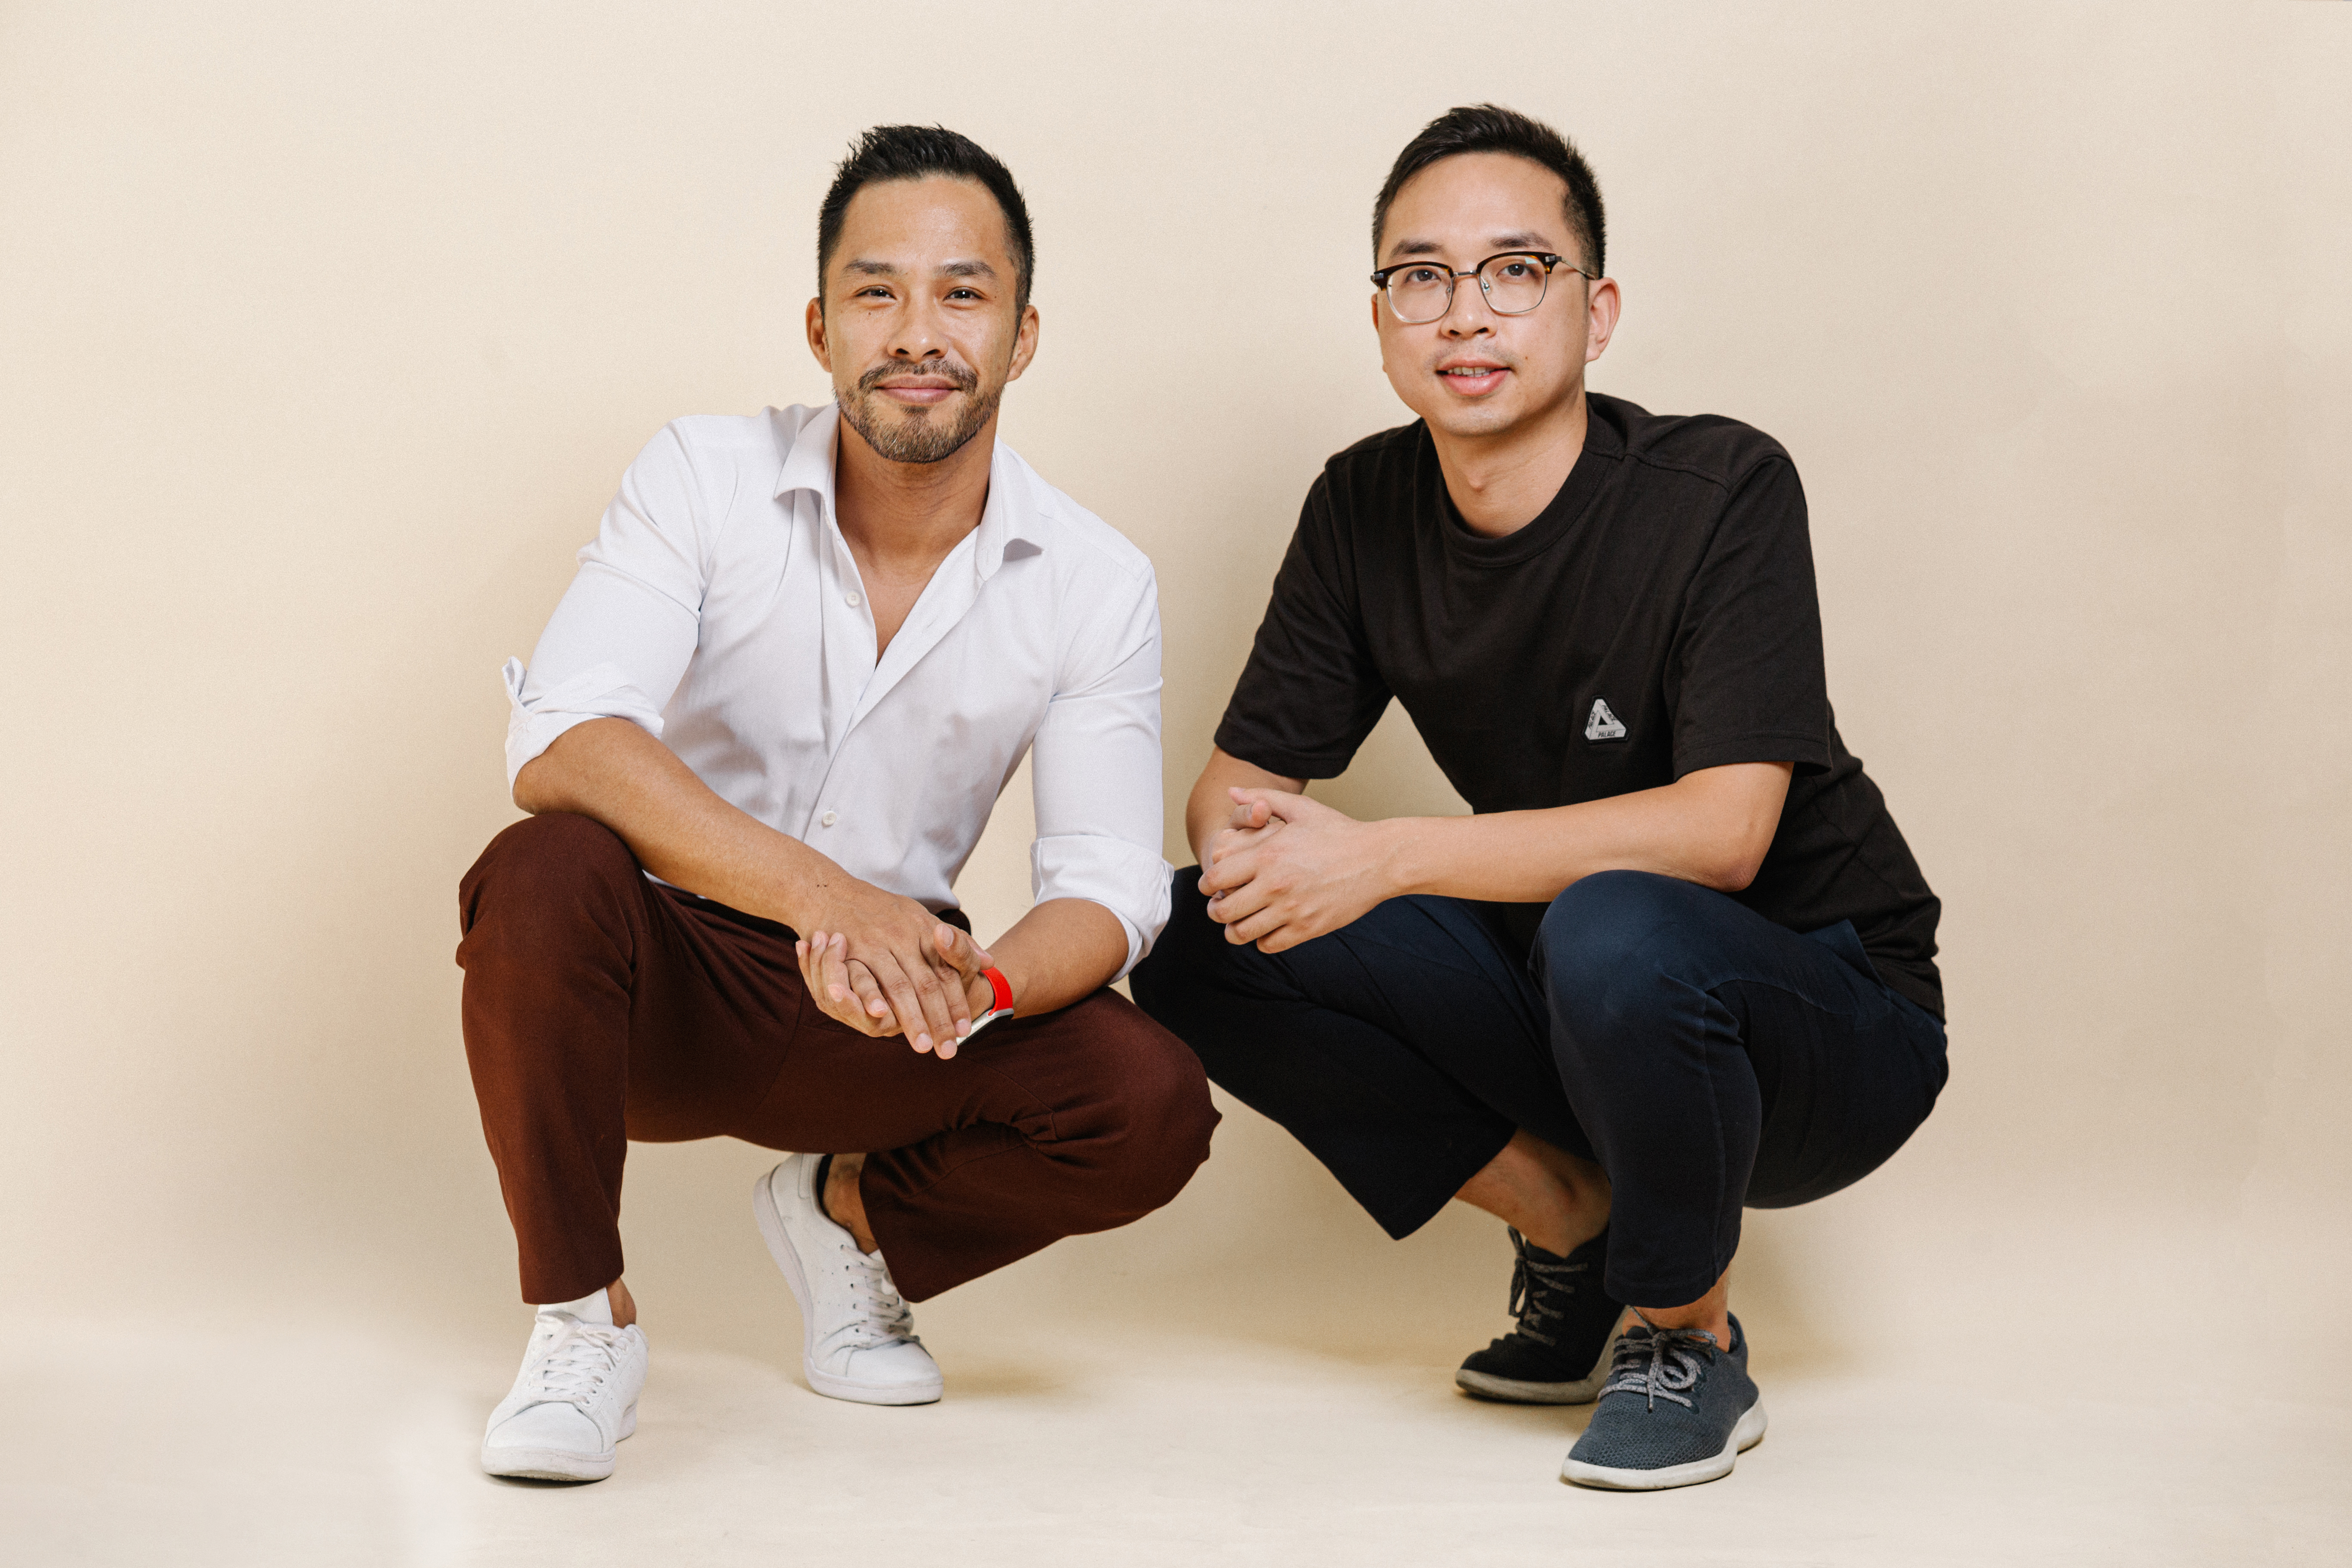 Cafe cùng founders: Anh Hao Tran, CEO của Vietcetera